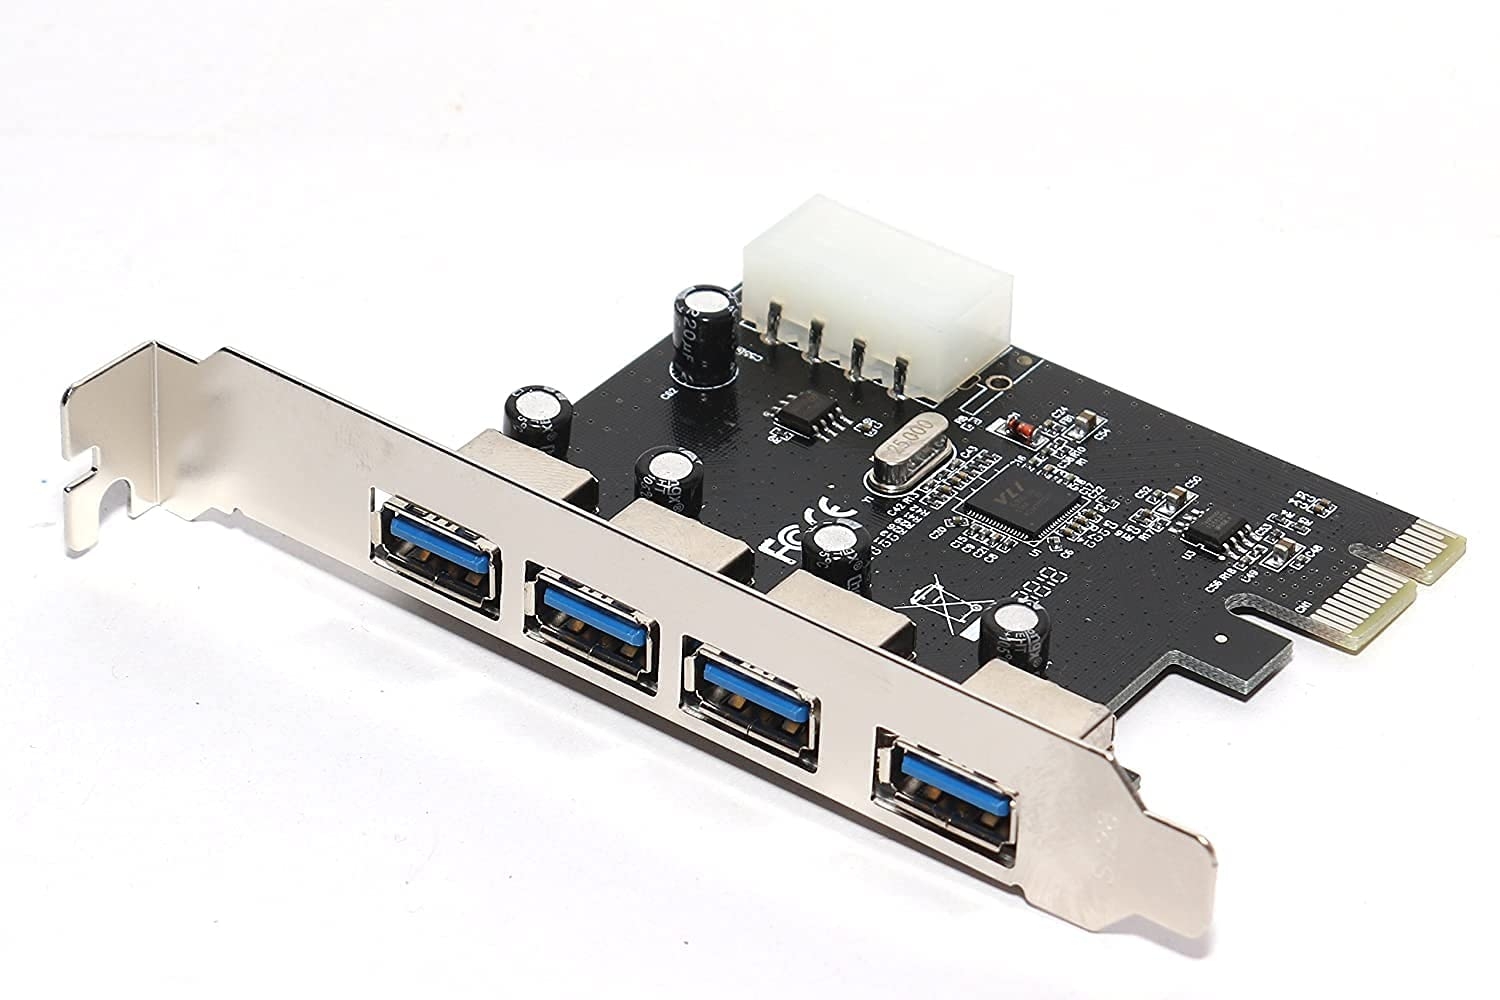 PCI Express Card 4 Port USB 3.0 with 5V 4-Pin Power Connector up to 5 Gbps Speed